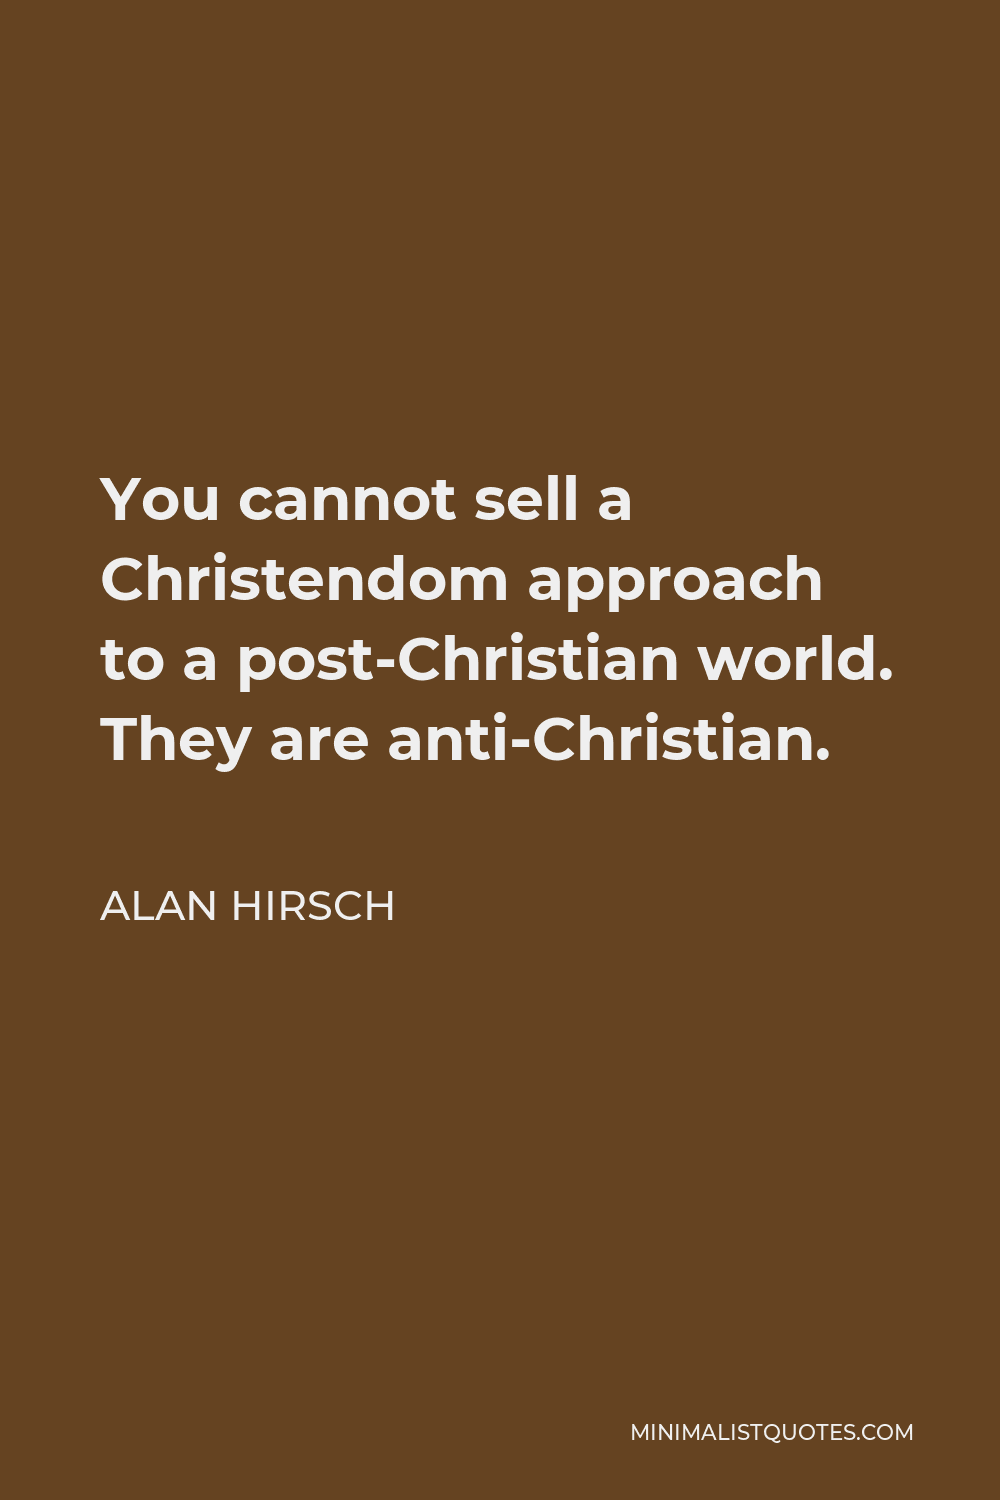 Alan Hirsch Quote - You cannot sell a Christendom approach to a post-Christian world. They are anti-Christian.